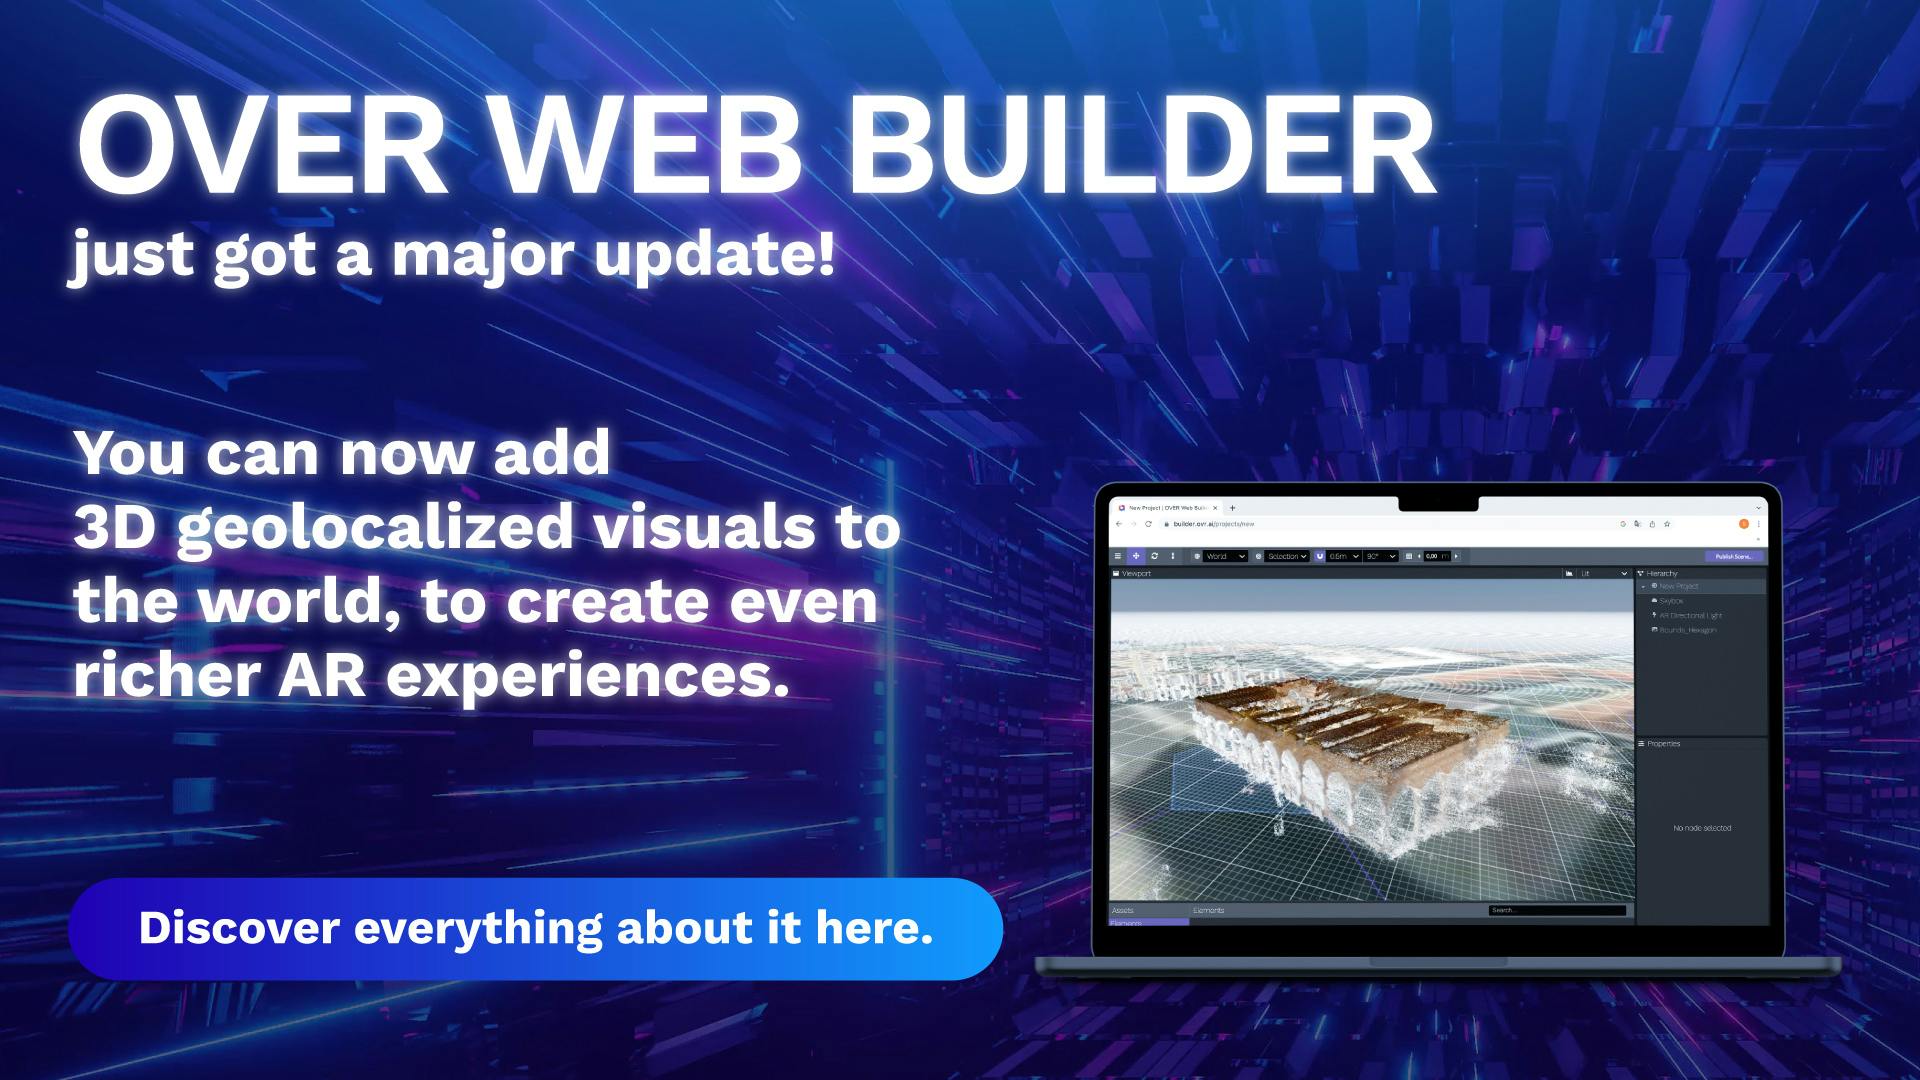 3D Point Clouds come to the Web Builder